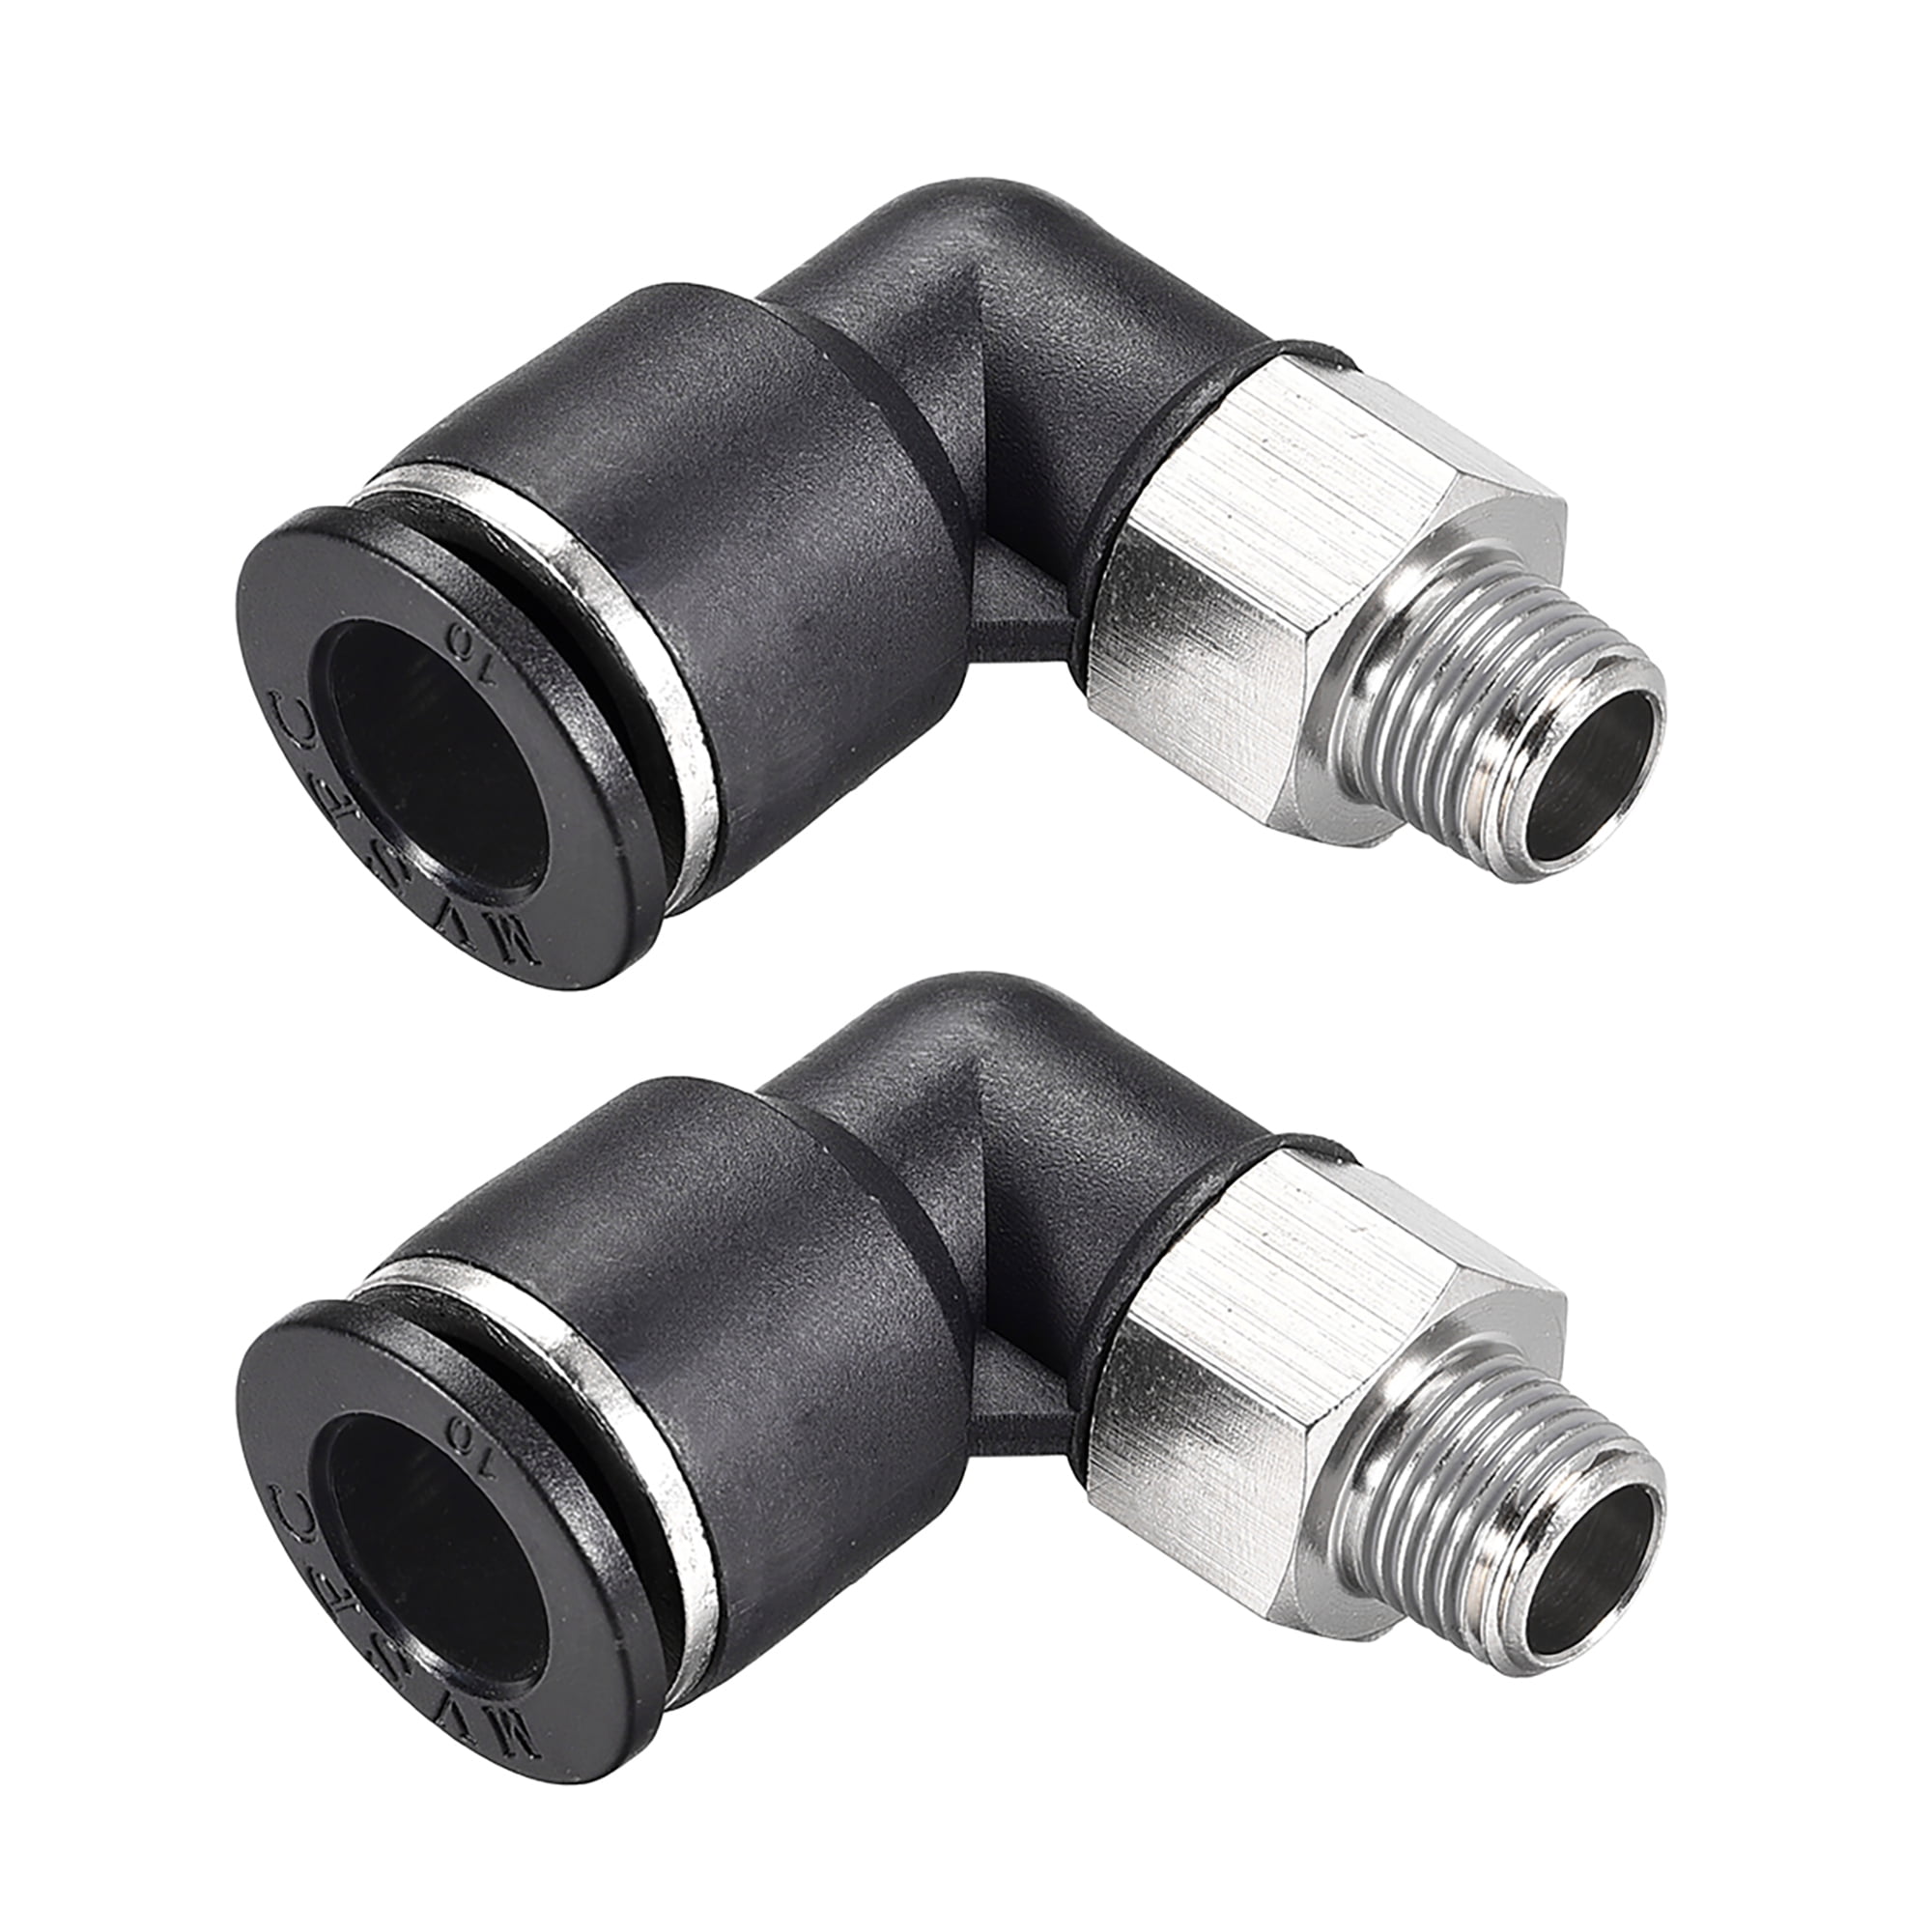 4 X Pneumatic Male Elbow Connector Tube 10mm Threaded 3/8" NPT Push In Fitting 